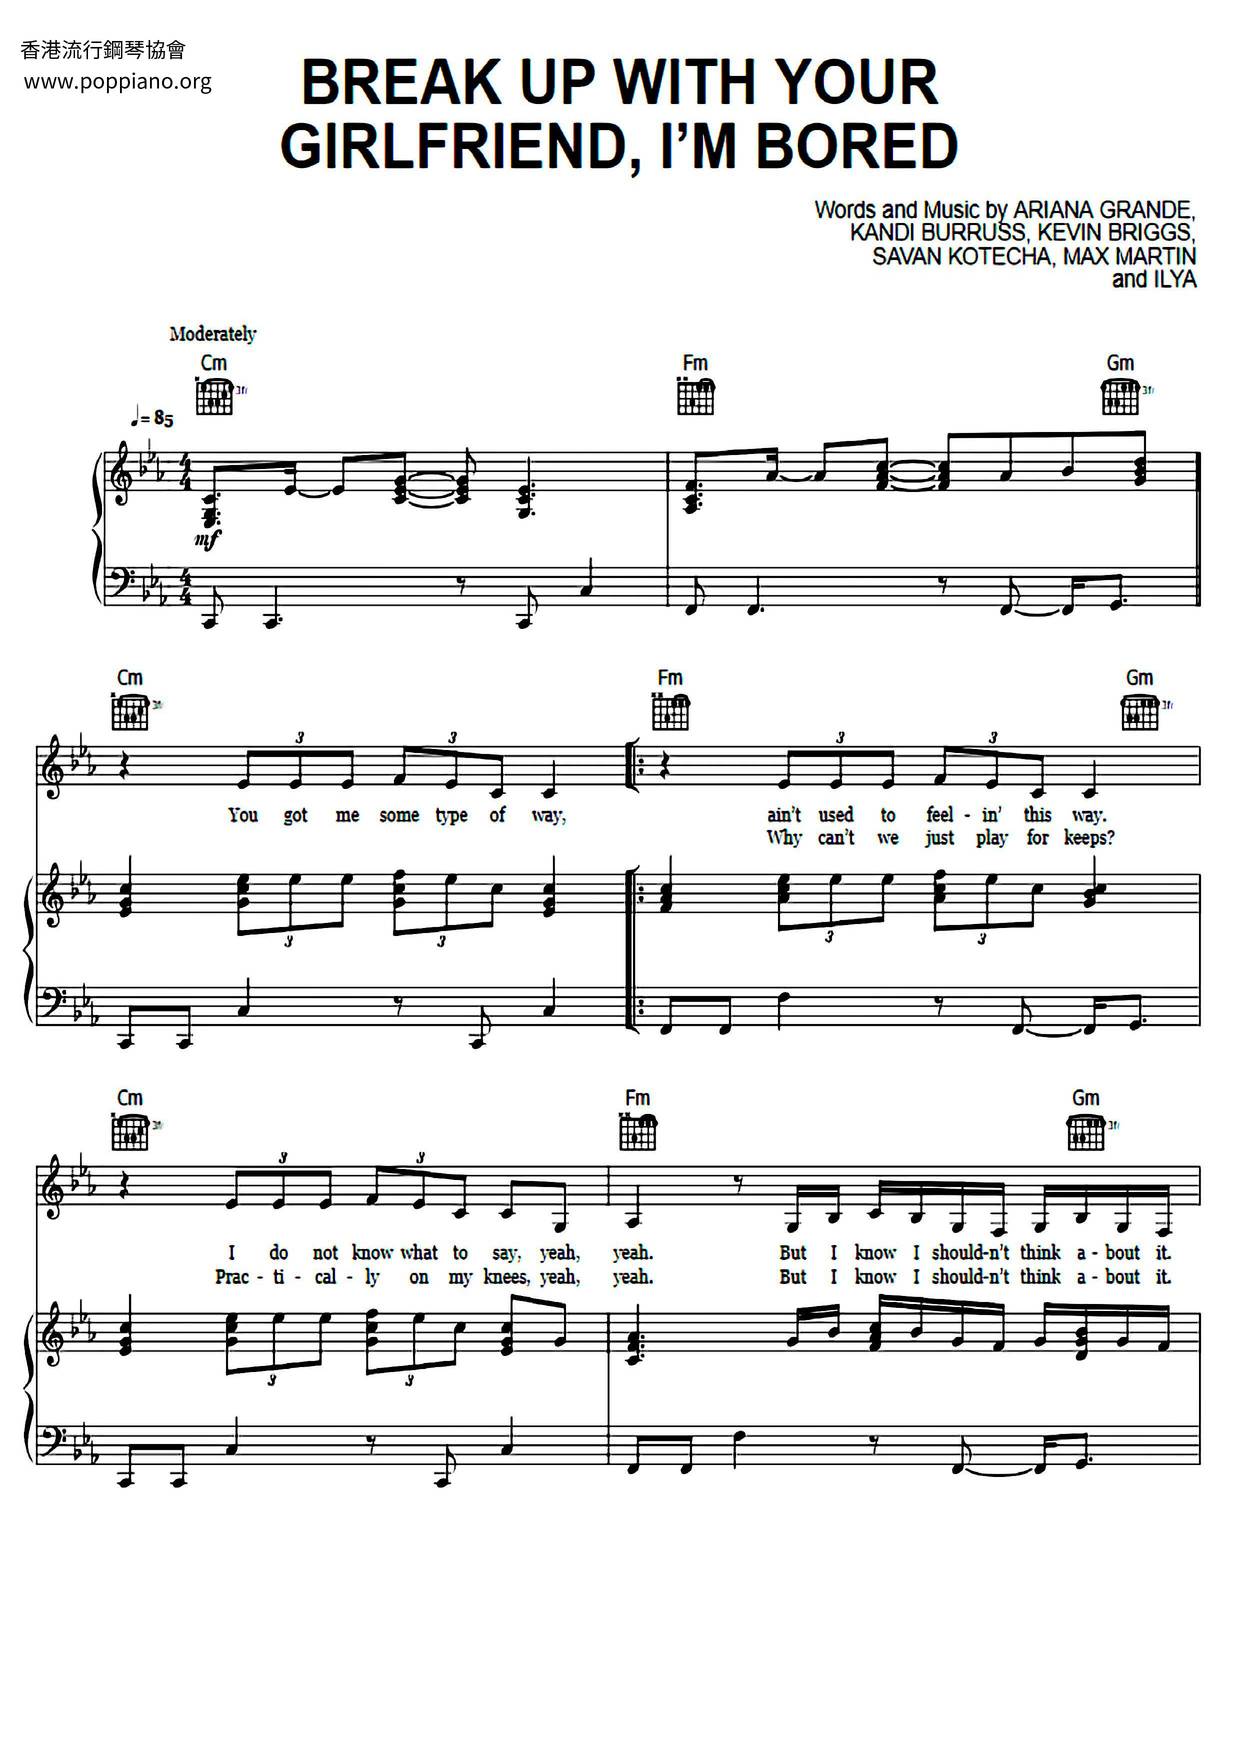 ☆ Ariana Grande-Break Up With Your Girlfriend, I'm Bored Sheet Music Pdf, - Free Score Download ☆